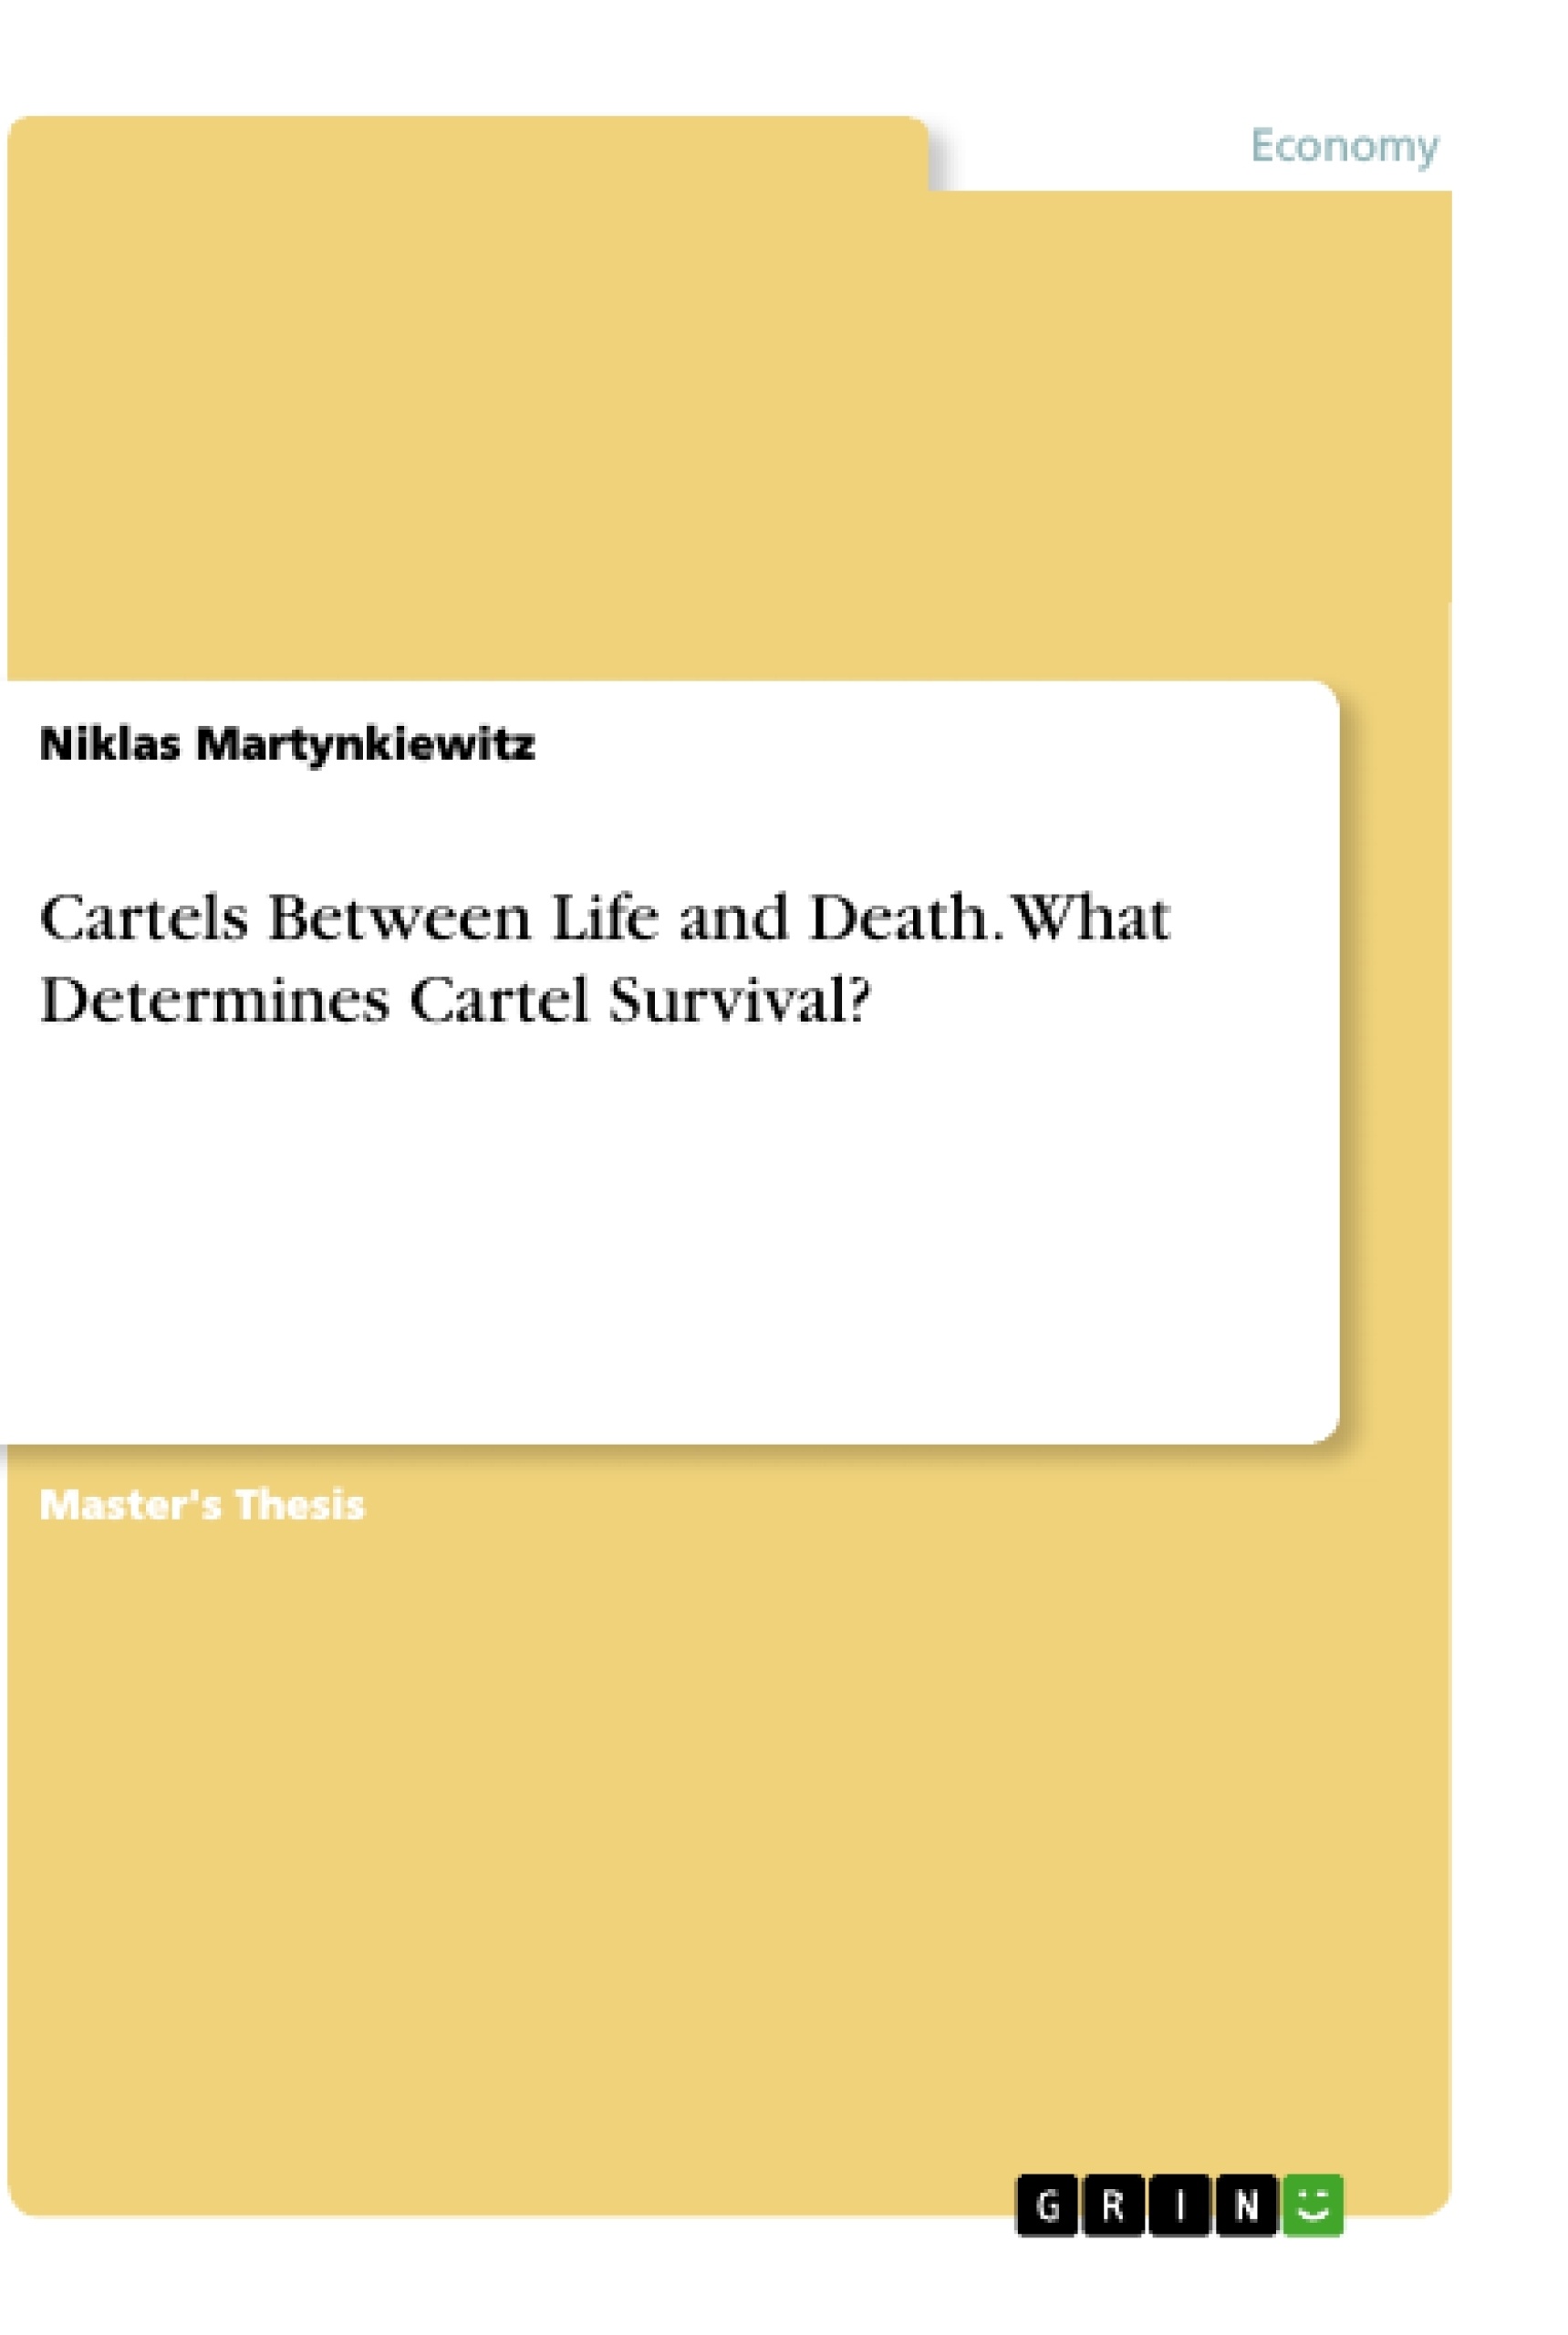 Titre: Cartels Between Life and Death. What Determines Cartel Survival?